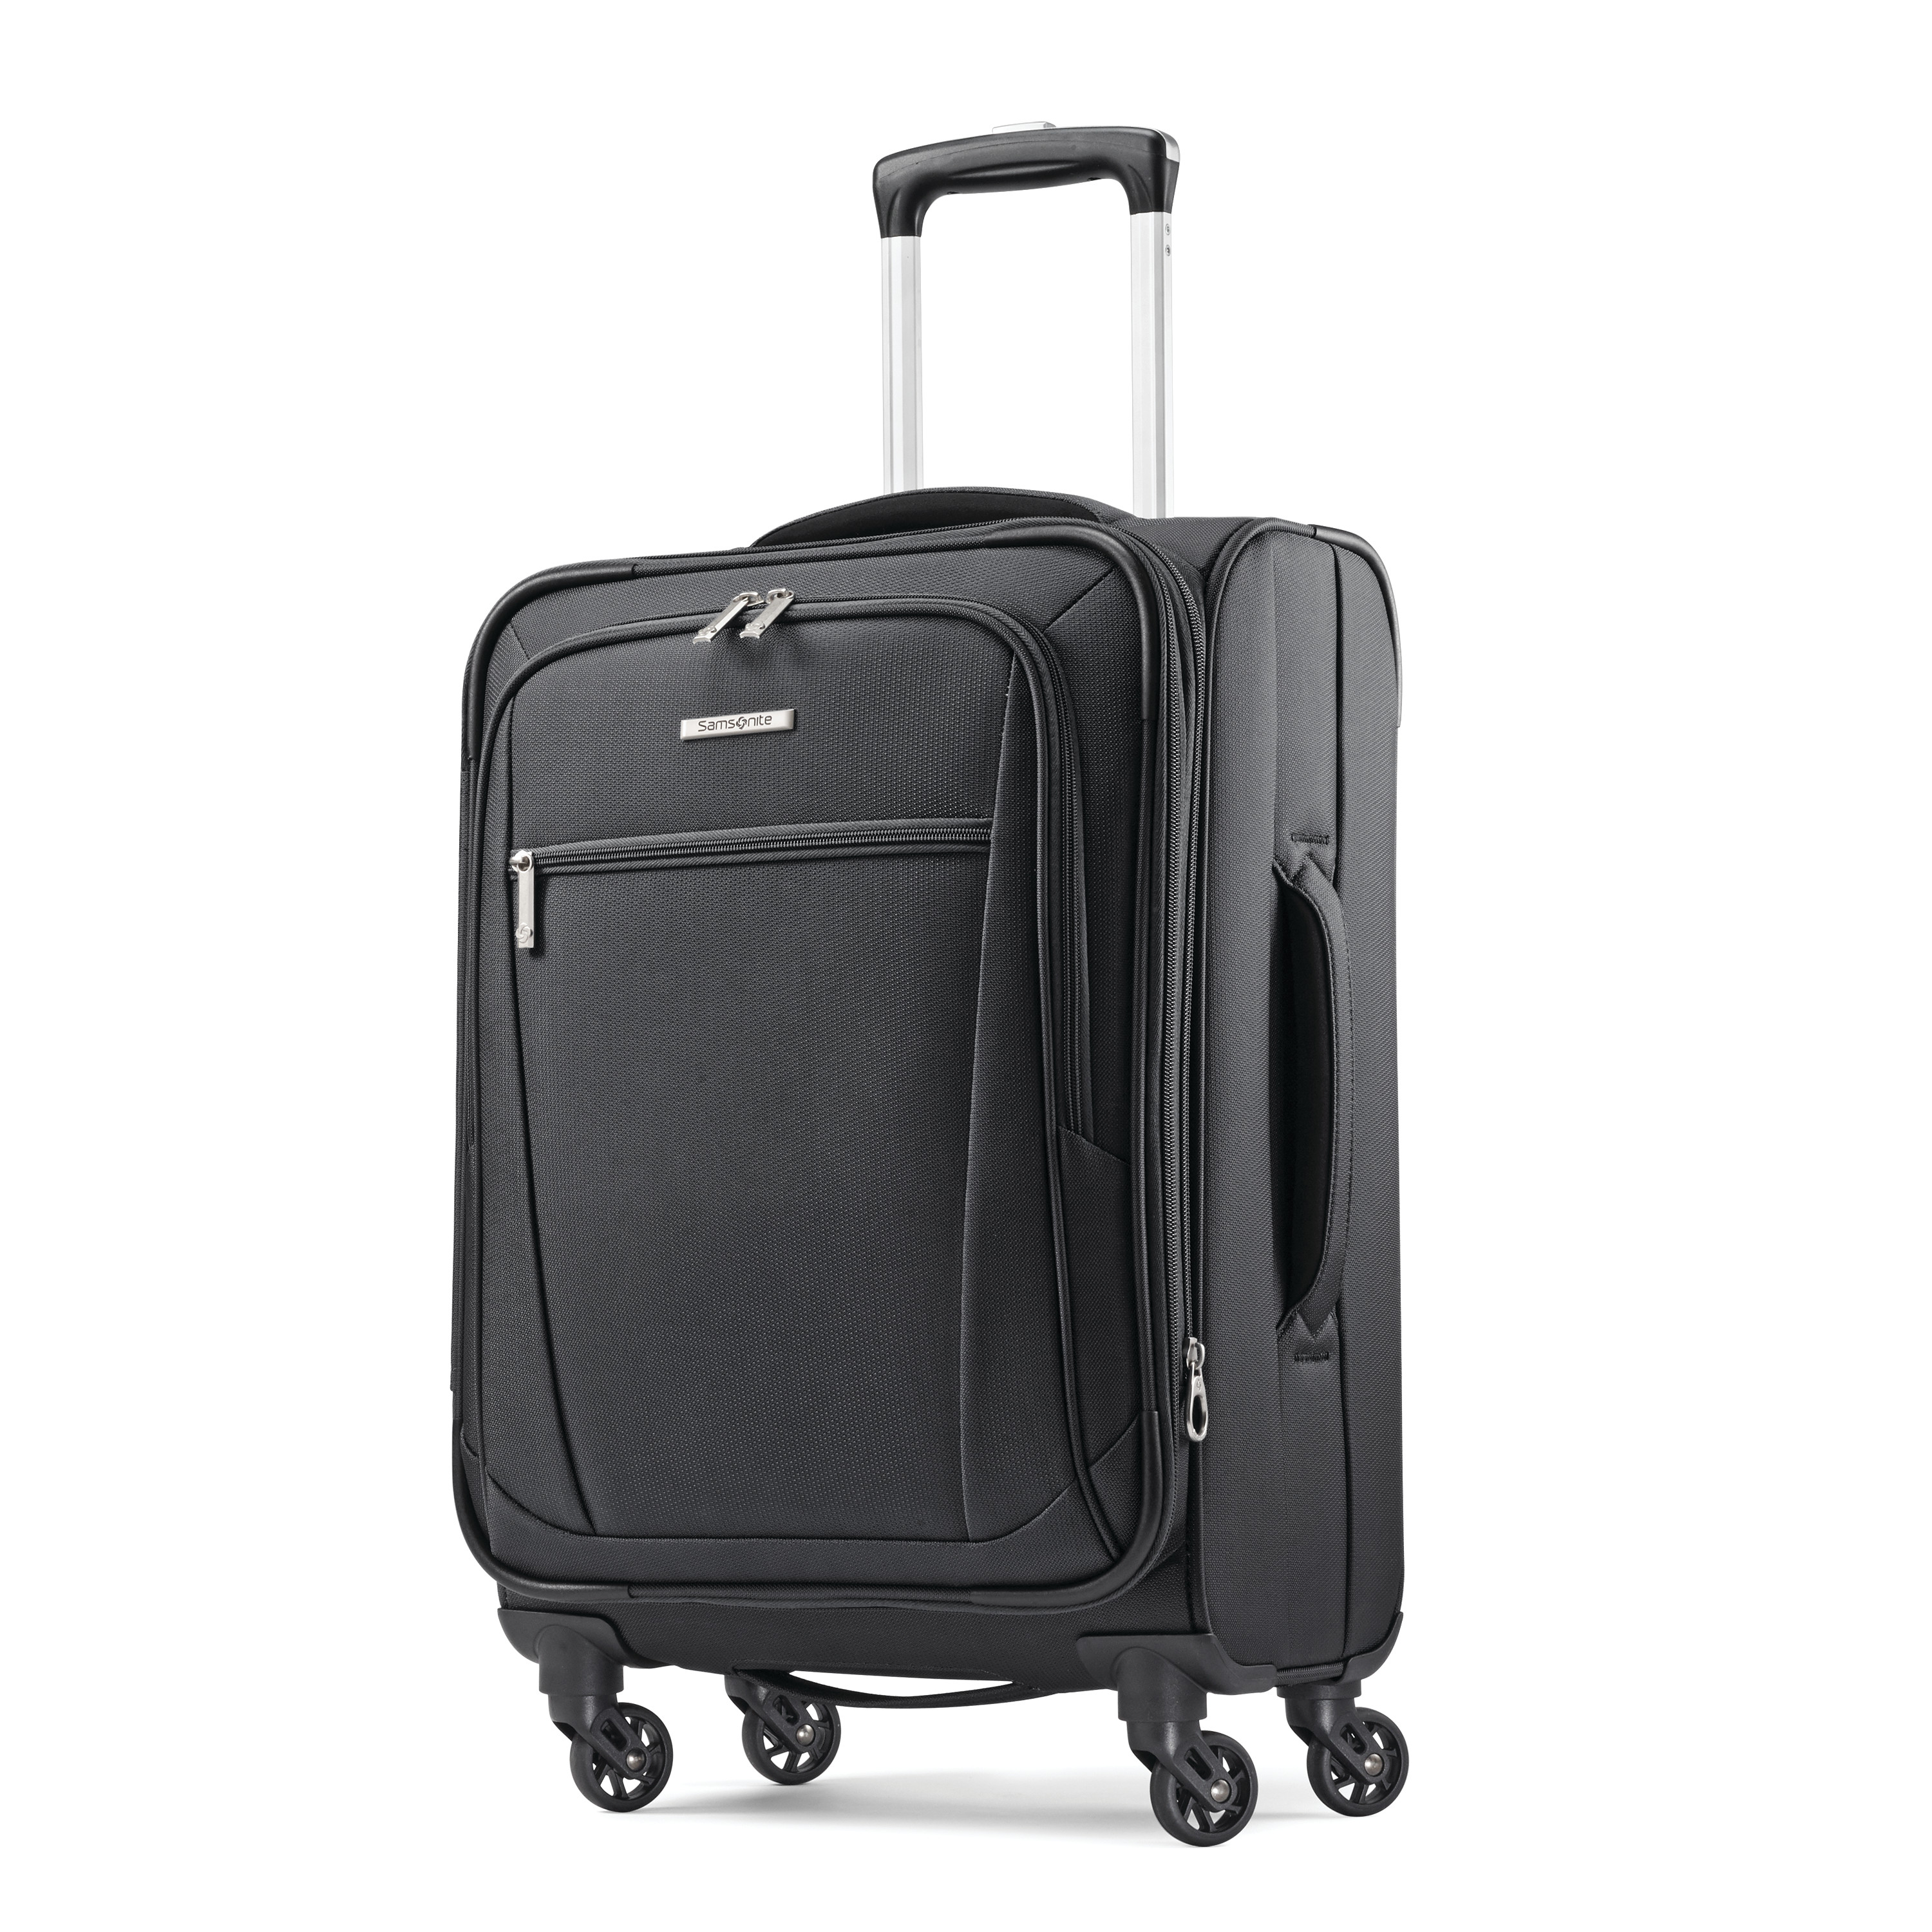 Samsonite Ascella I Carry-On Spinner Luggage